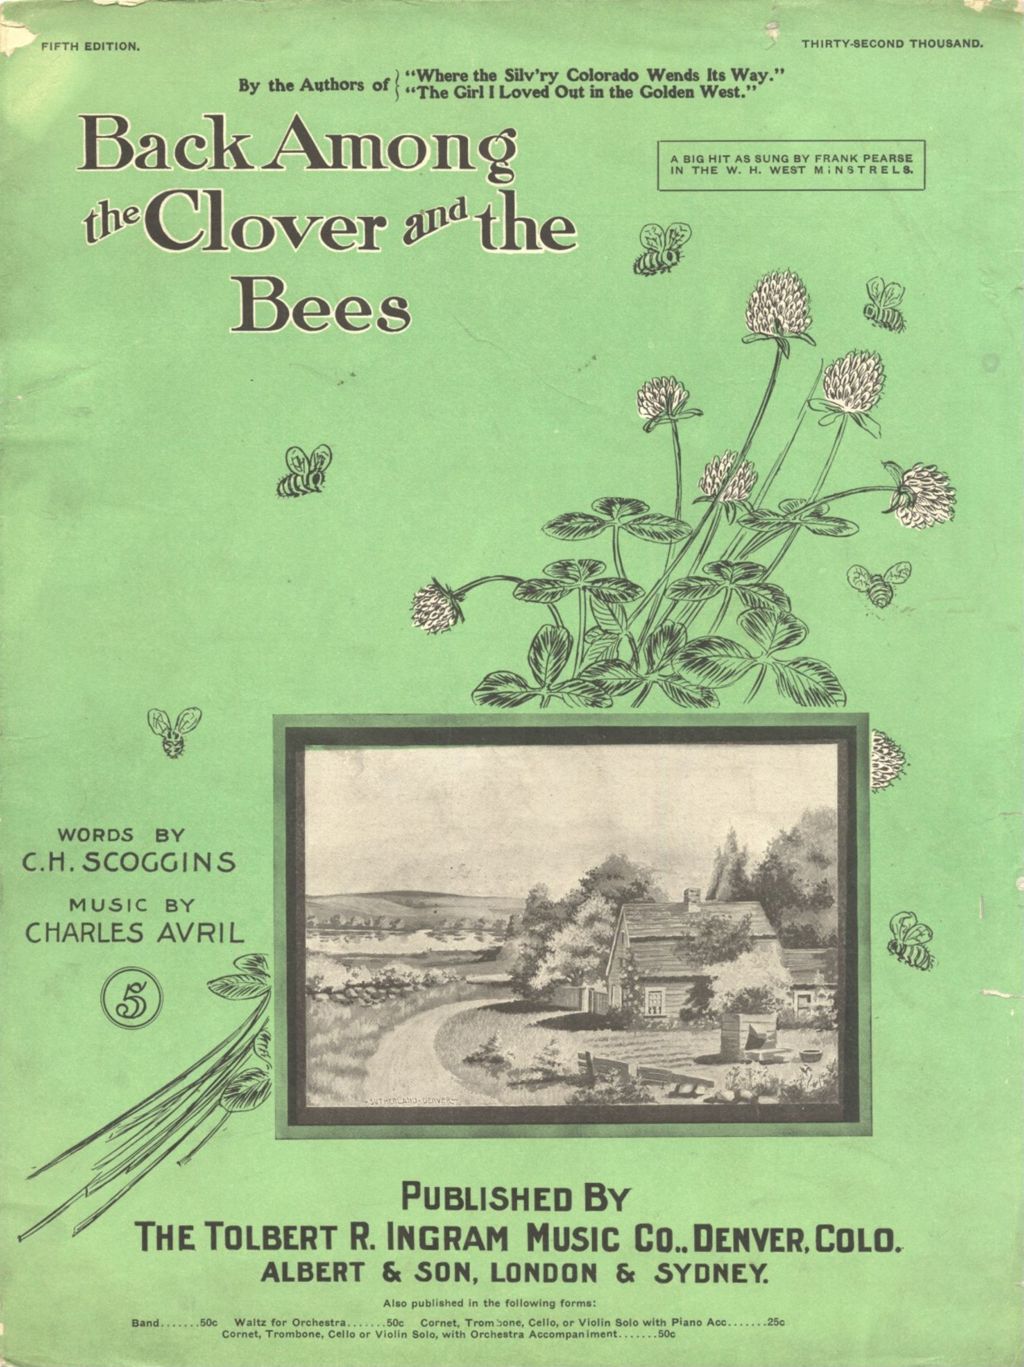 Back Among the Clover and the Bees